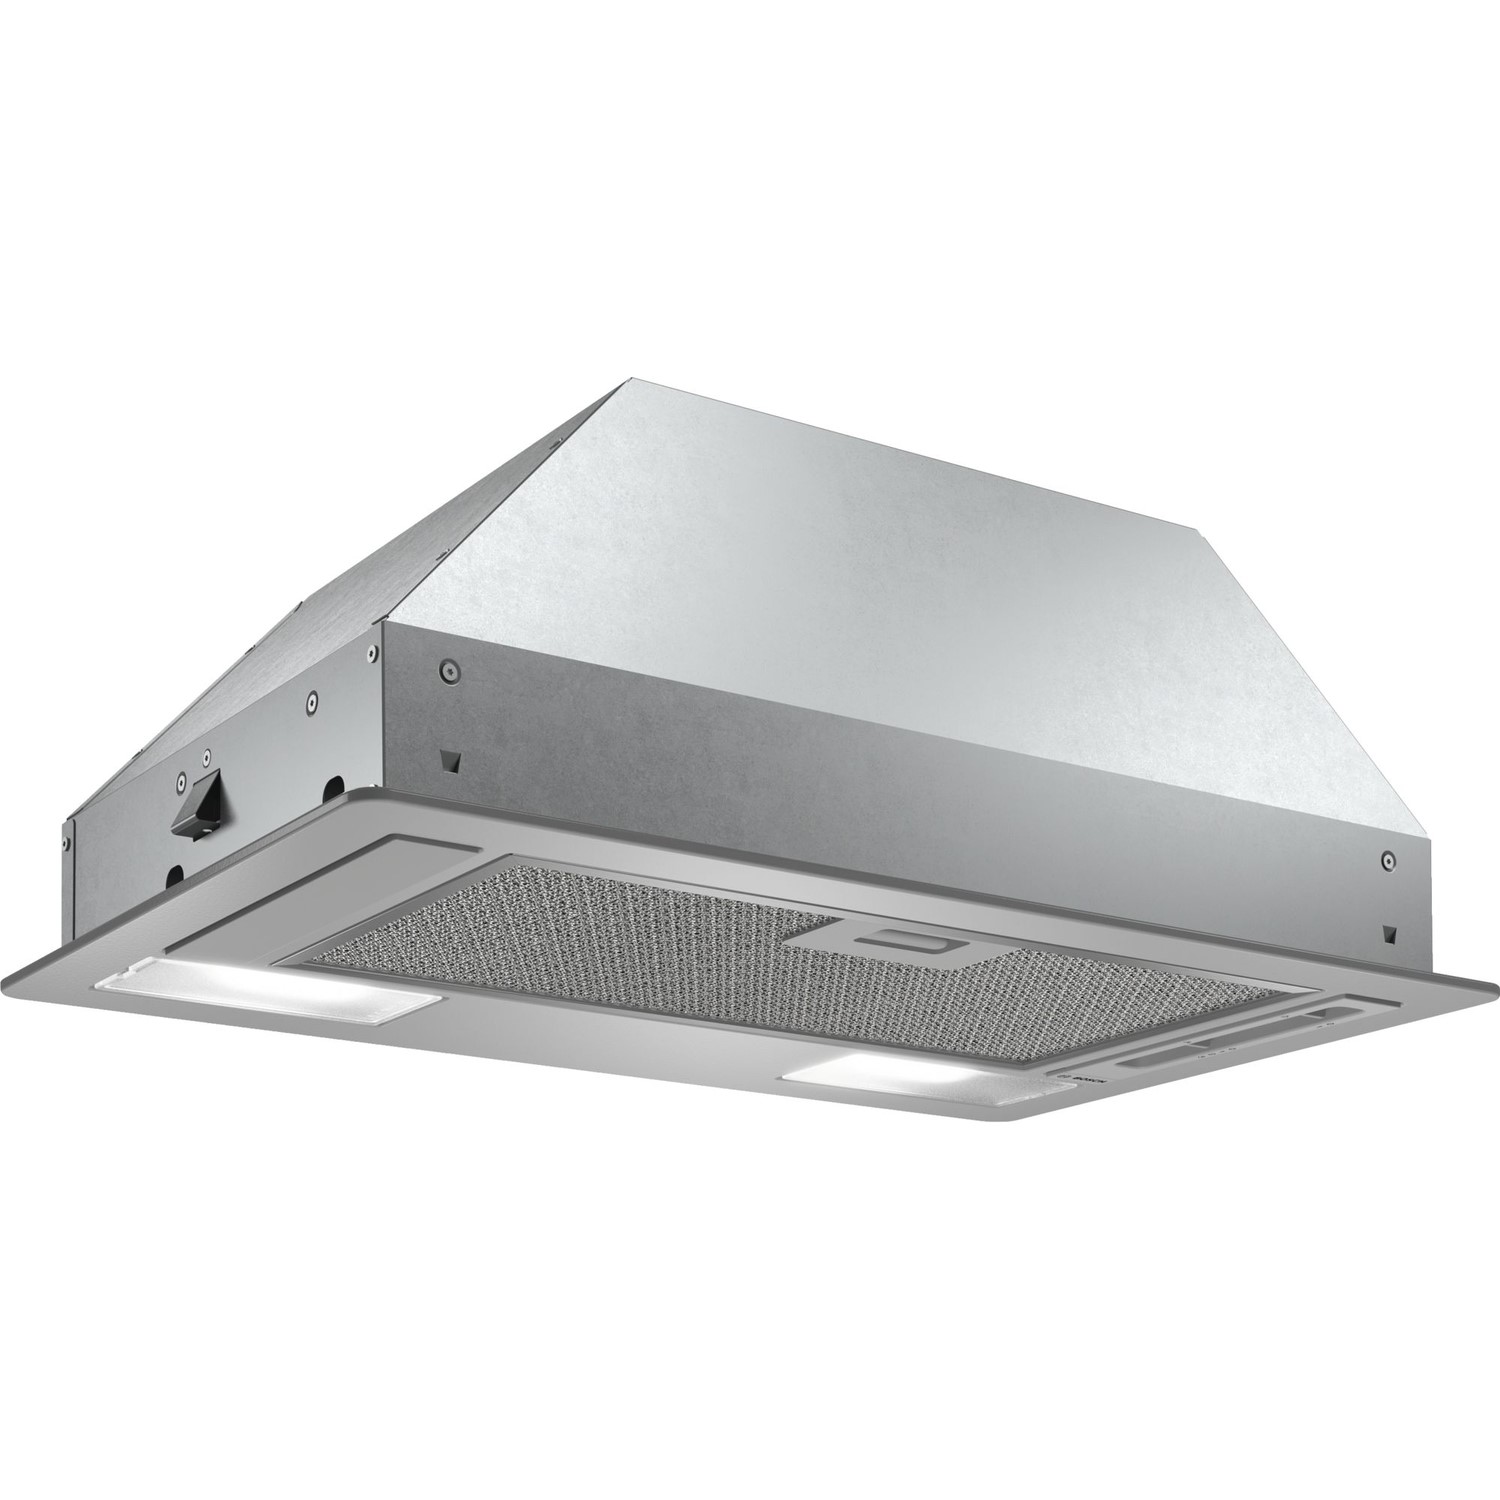 Bosch Series 2 DLN53AA70B 53 cm Canopy Cooker Hood - Anthracite